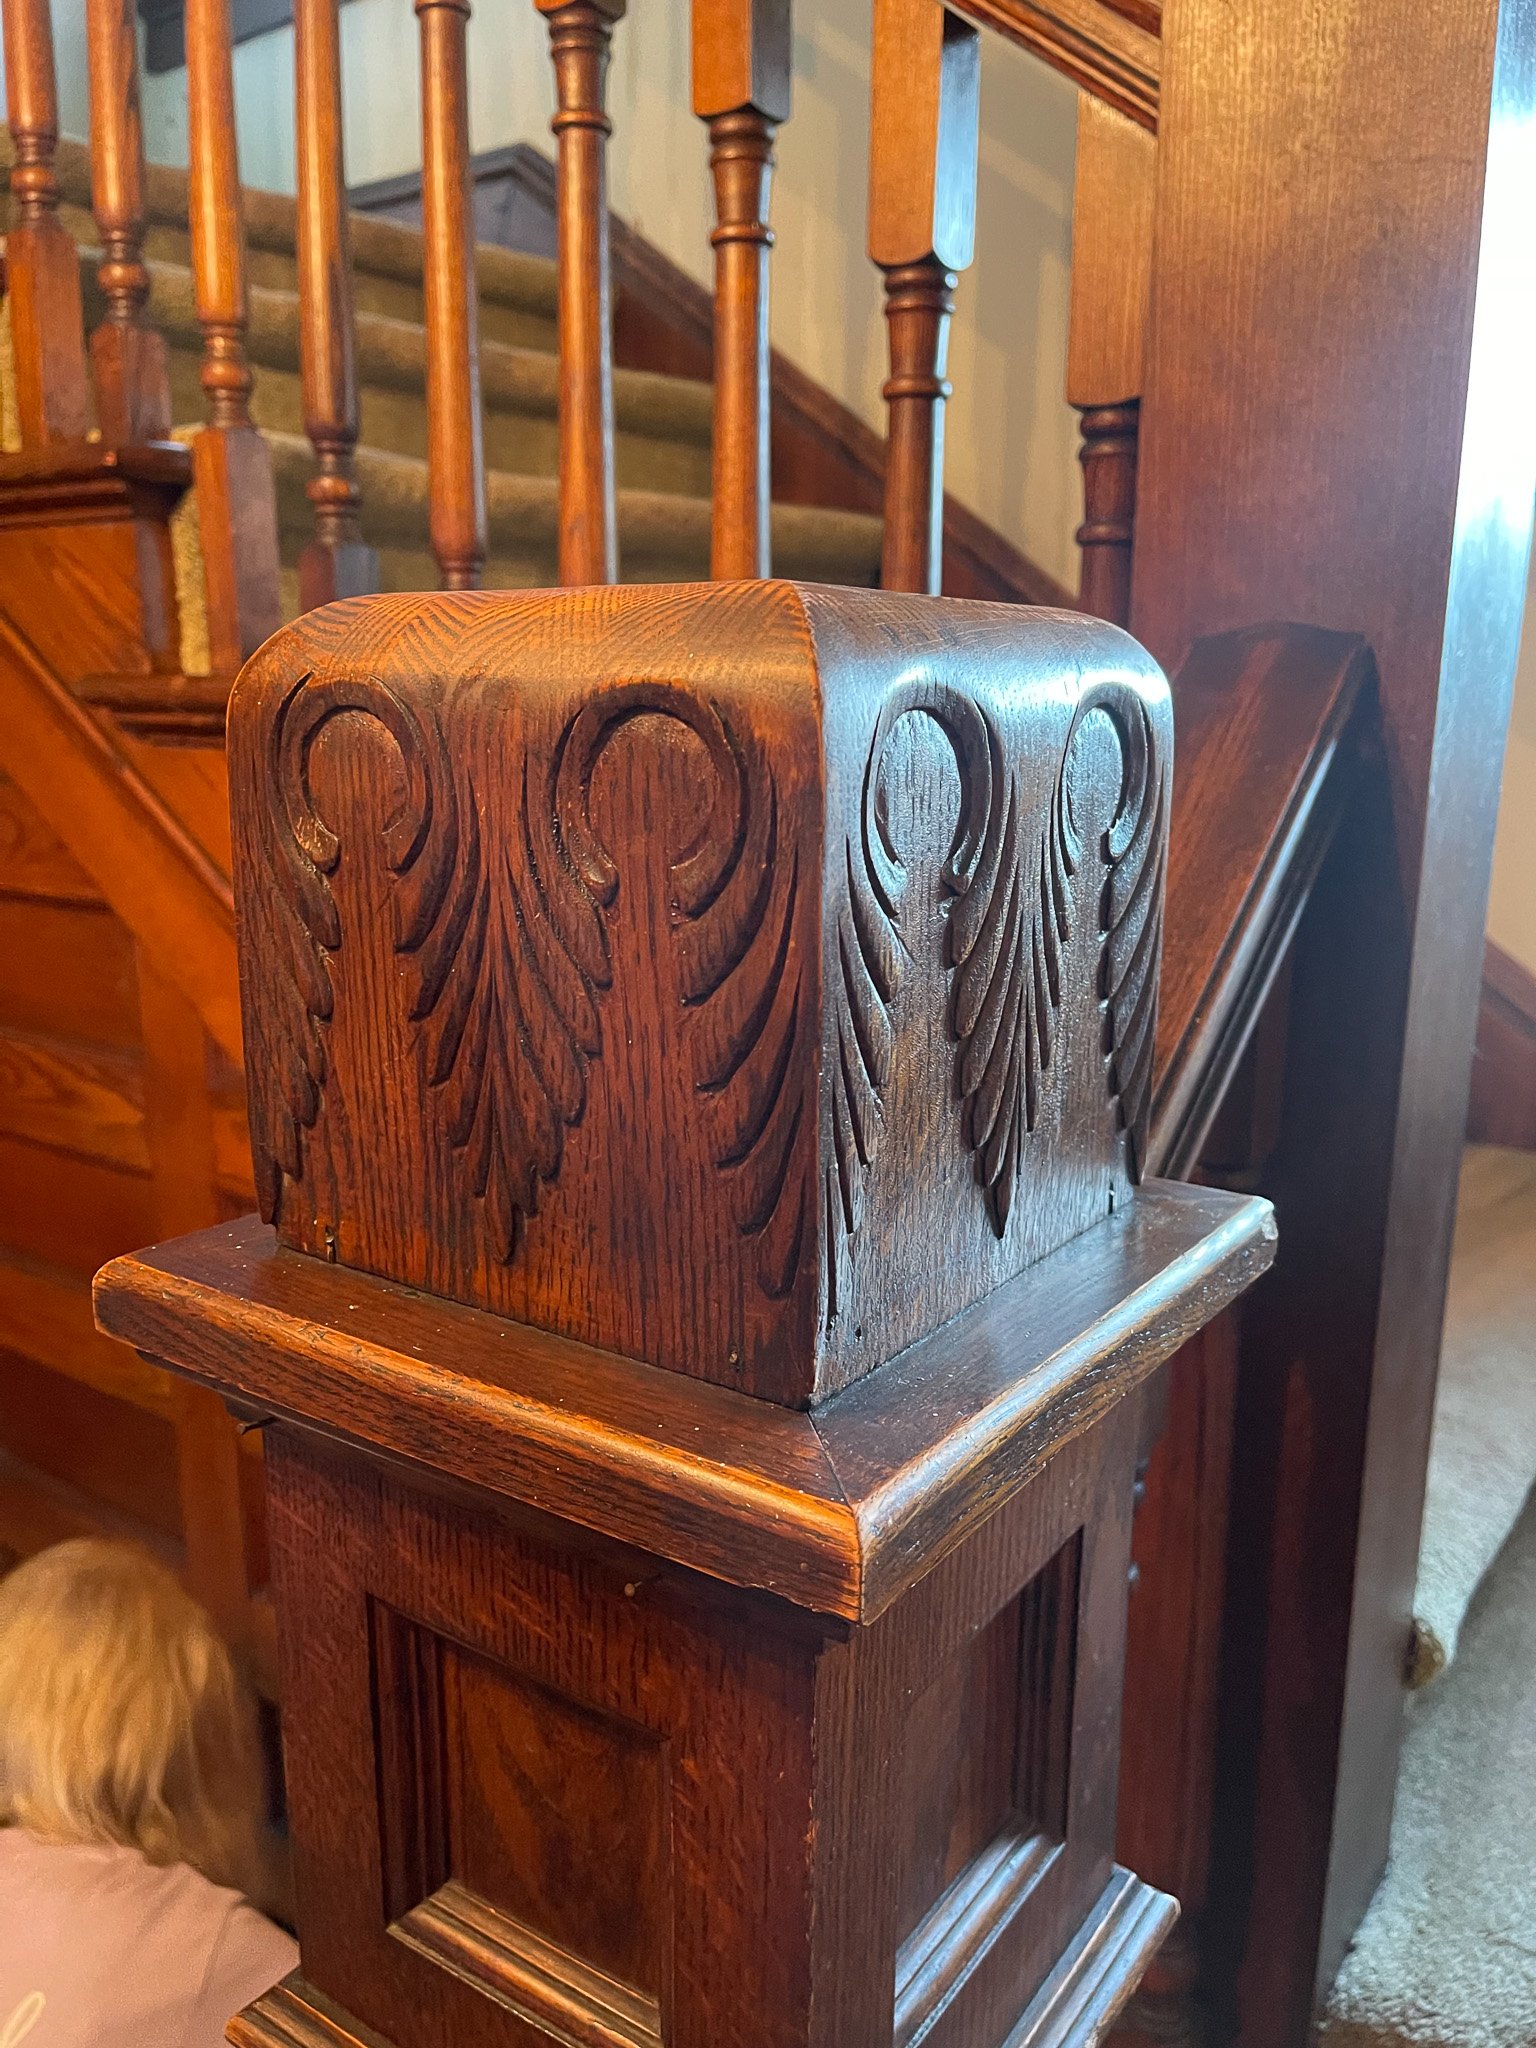 Here's a close-up of a newel post.  Handcarved gorgeousness!